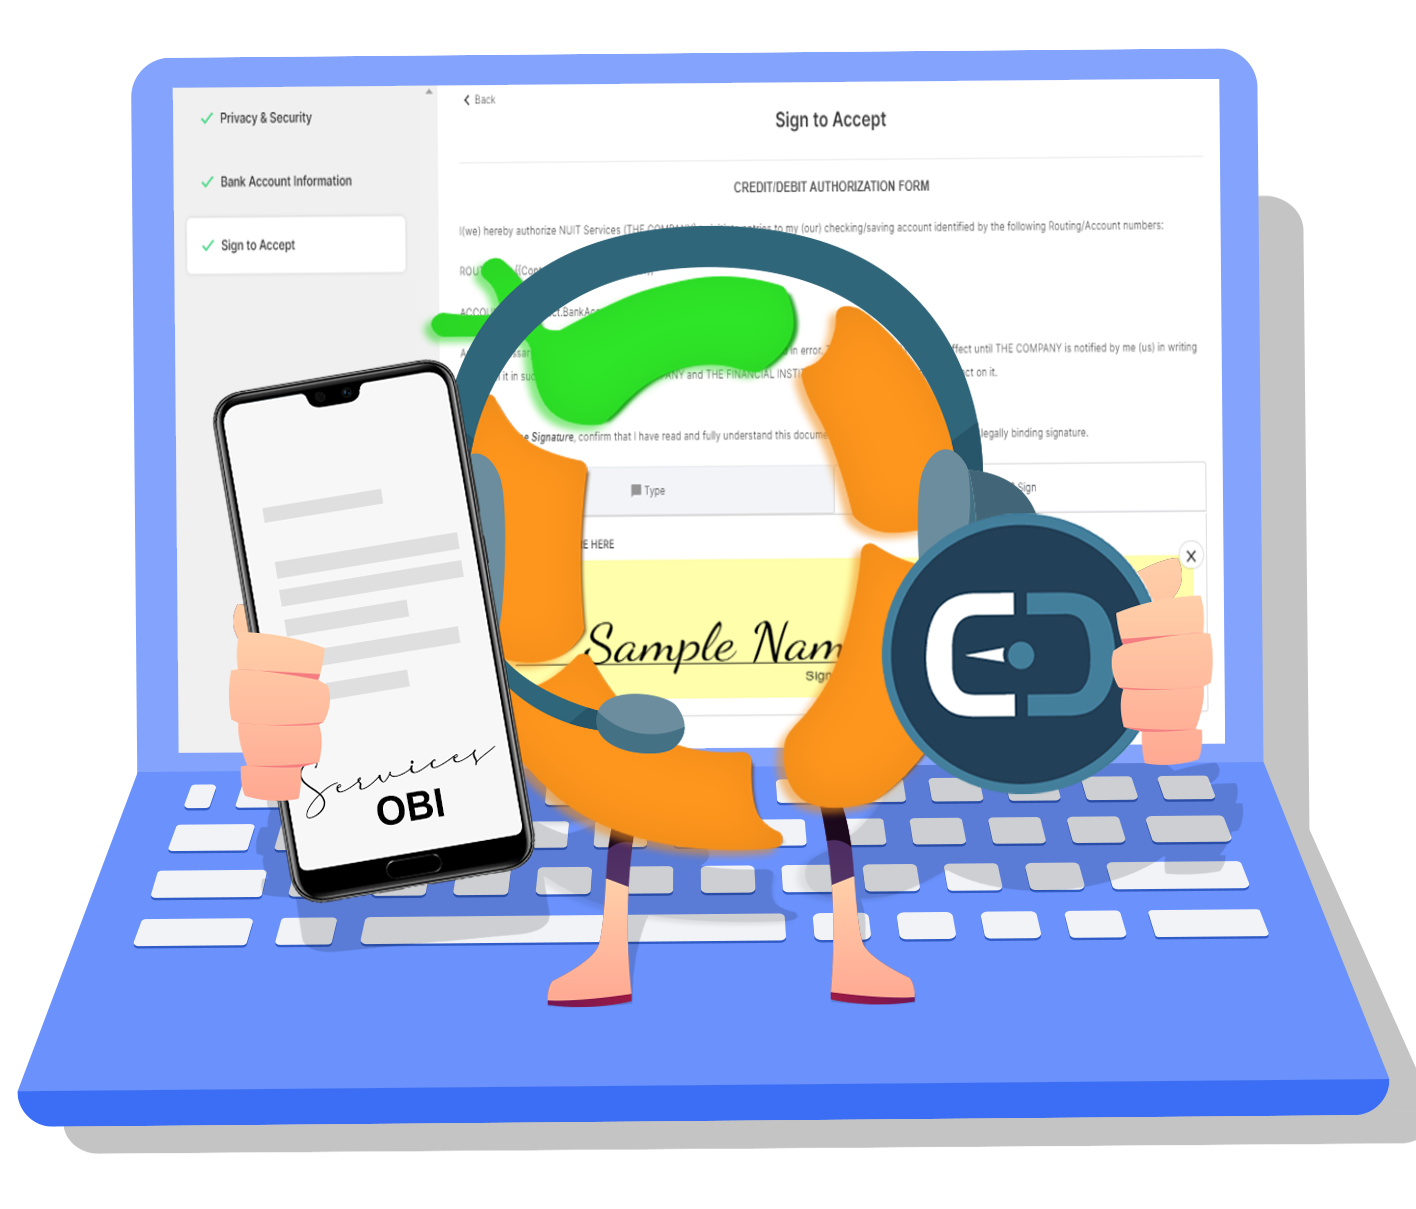 OBI Services mascot holding a phone and SuiteDash logo in front of a laptop screen showing an e-signing form.